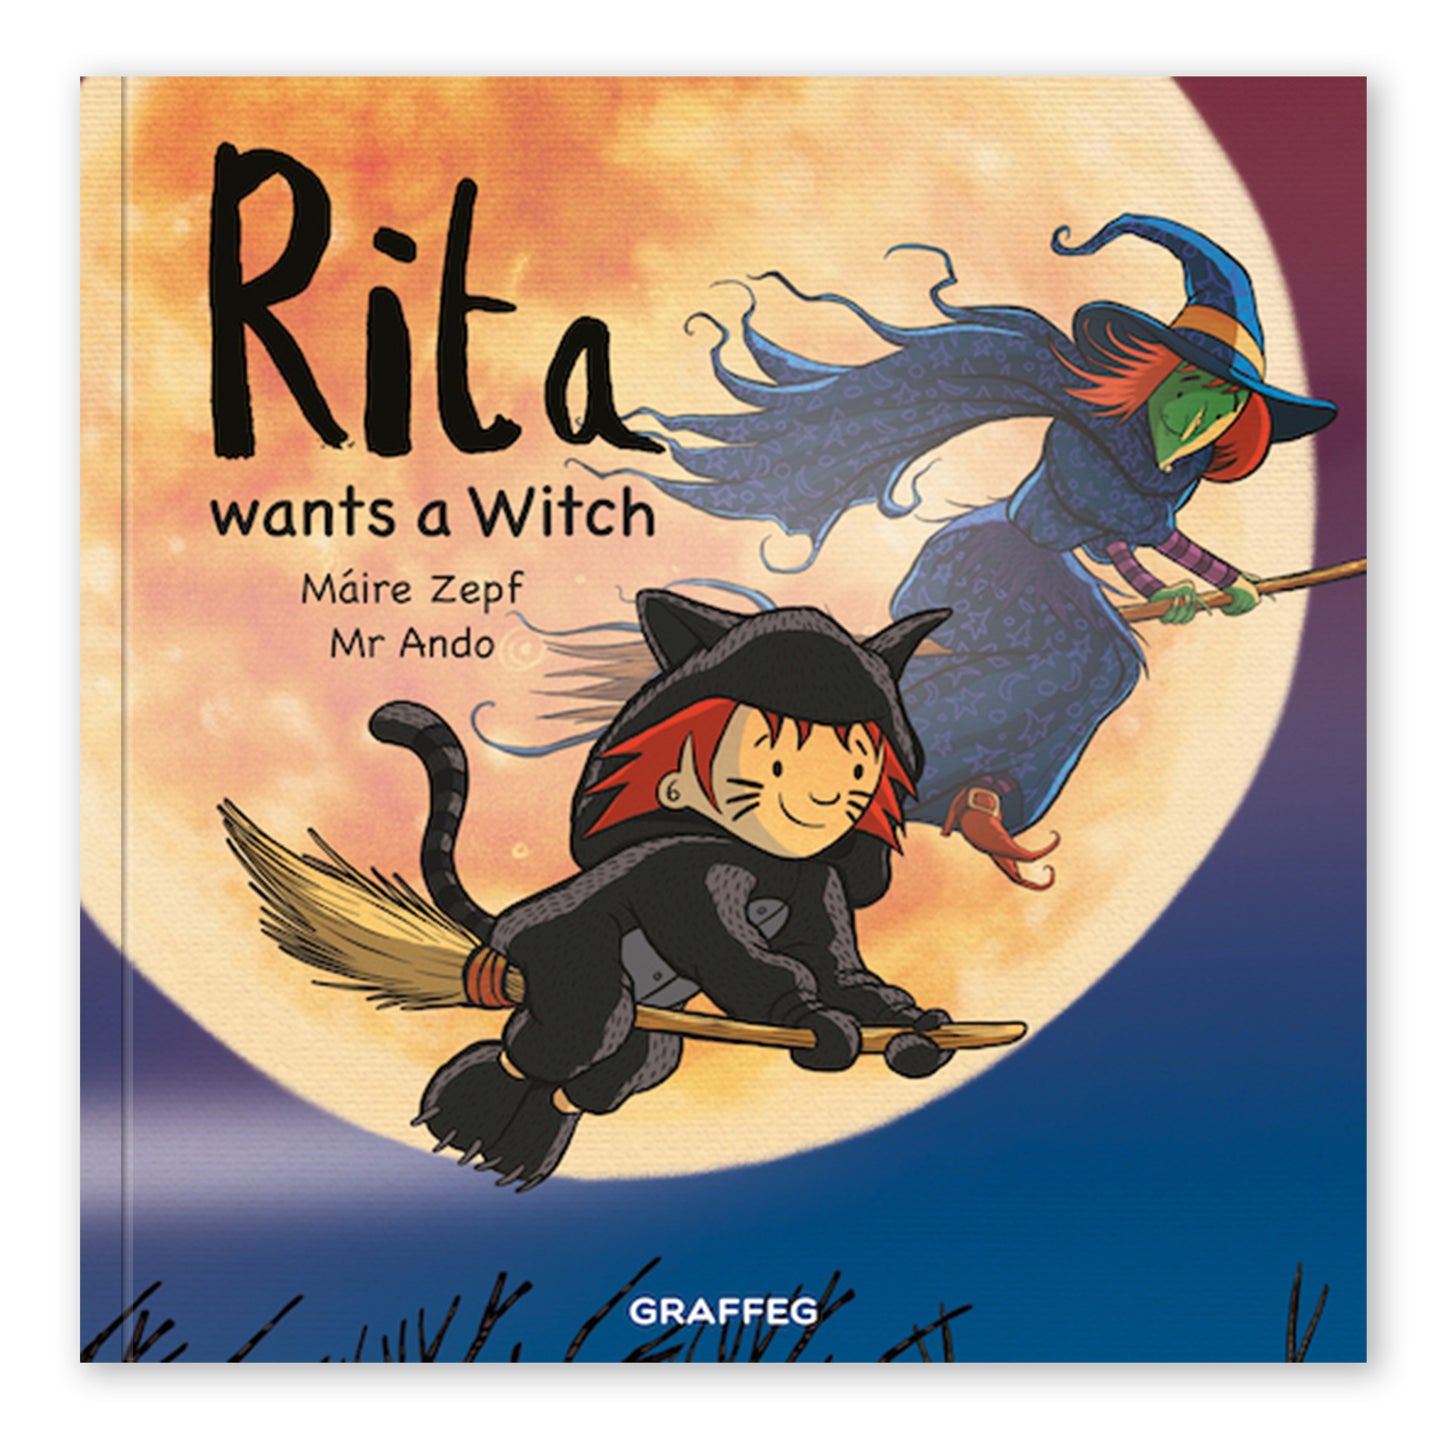 Rita wants a Witch by Máire Zepf and Mr Ando, Andrew Whitson, published by Graffeg halloween picture book cover